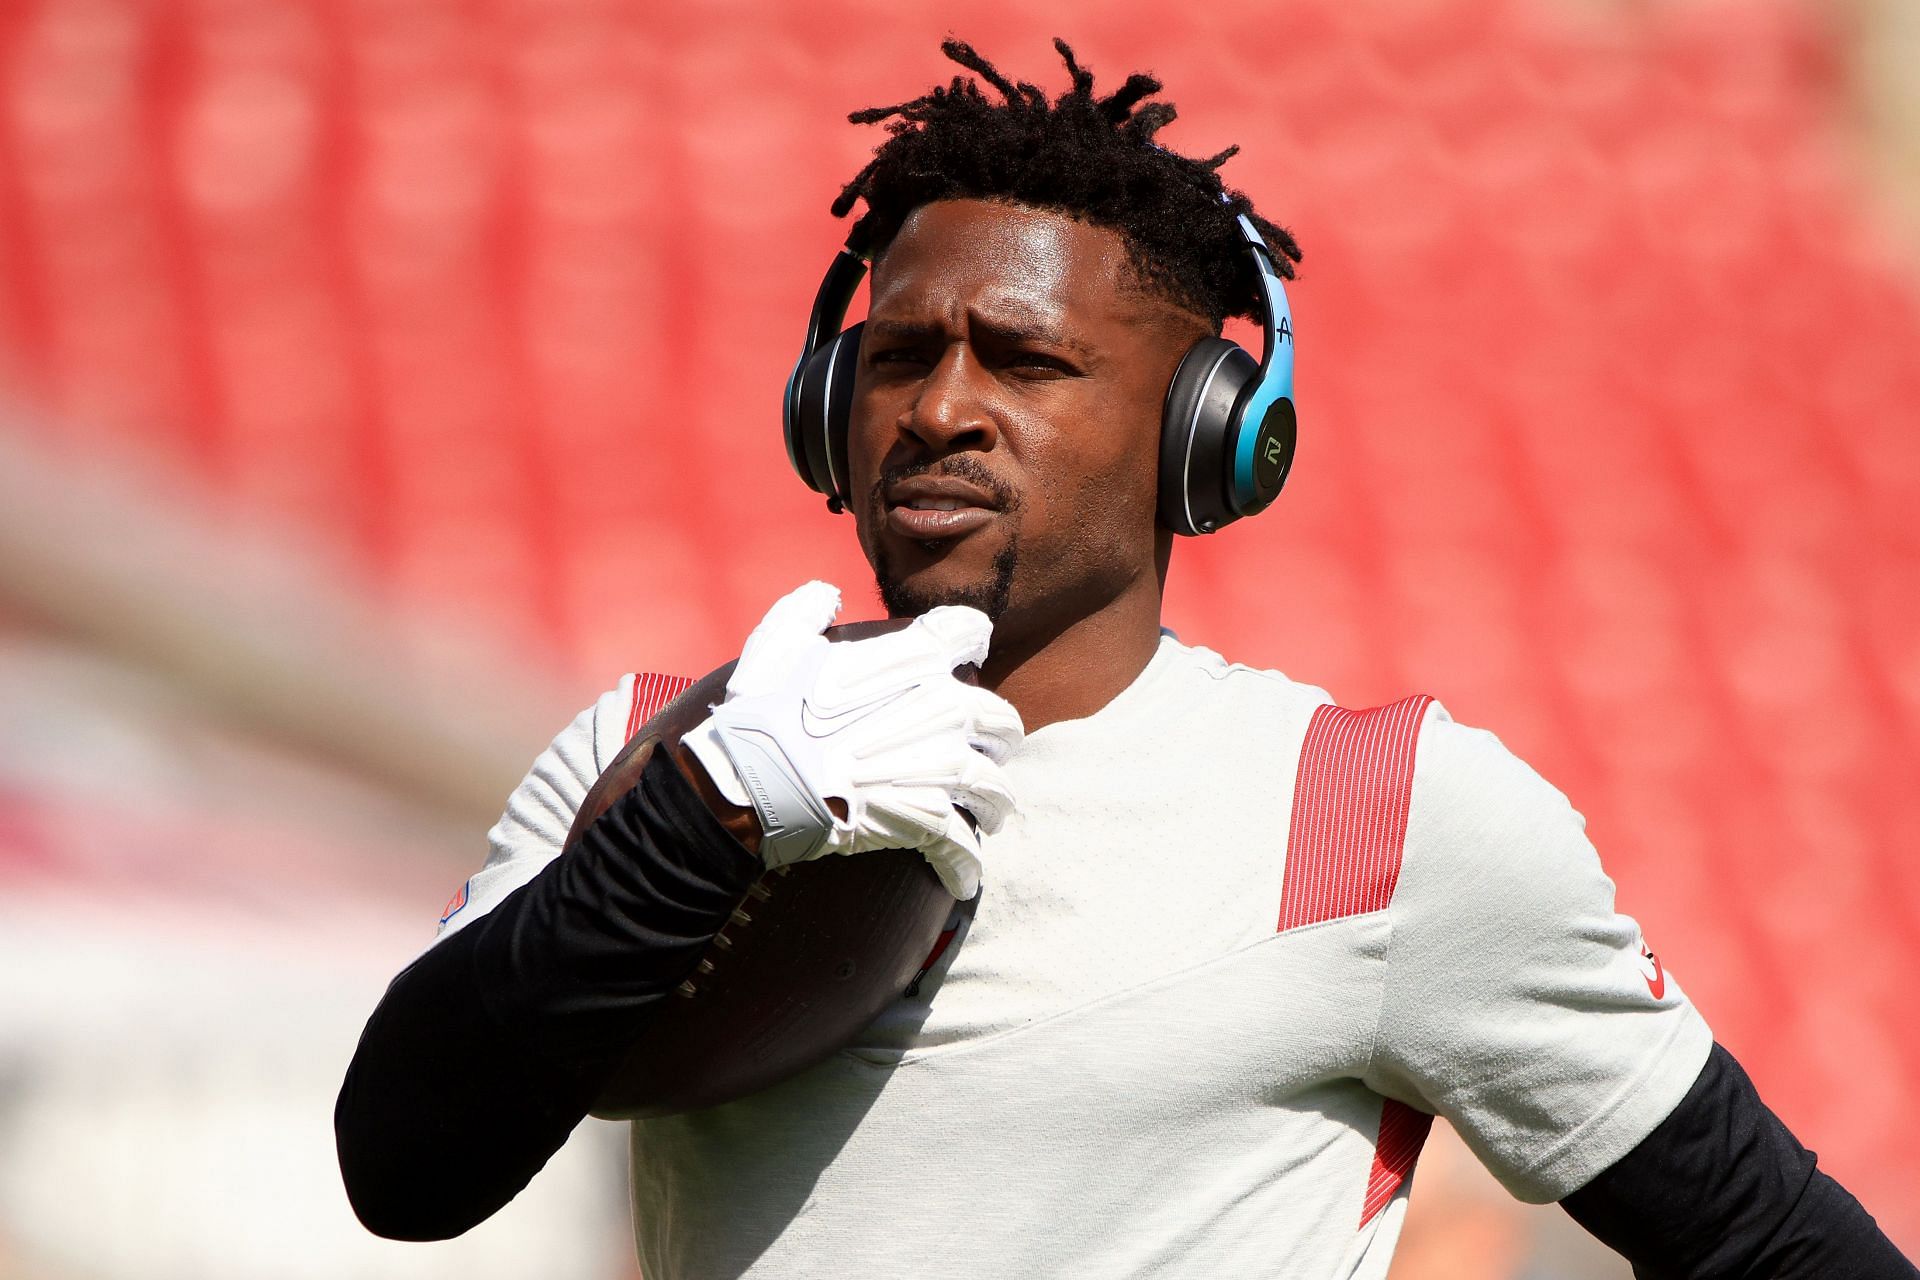 Antonio Brown's Baby Mother Calls Out Snapchat For Explicit Images